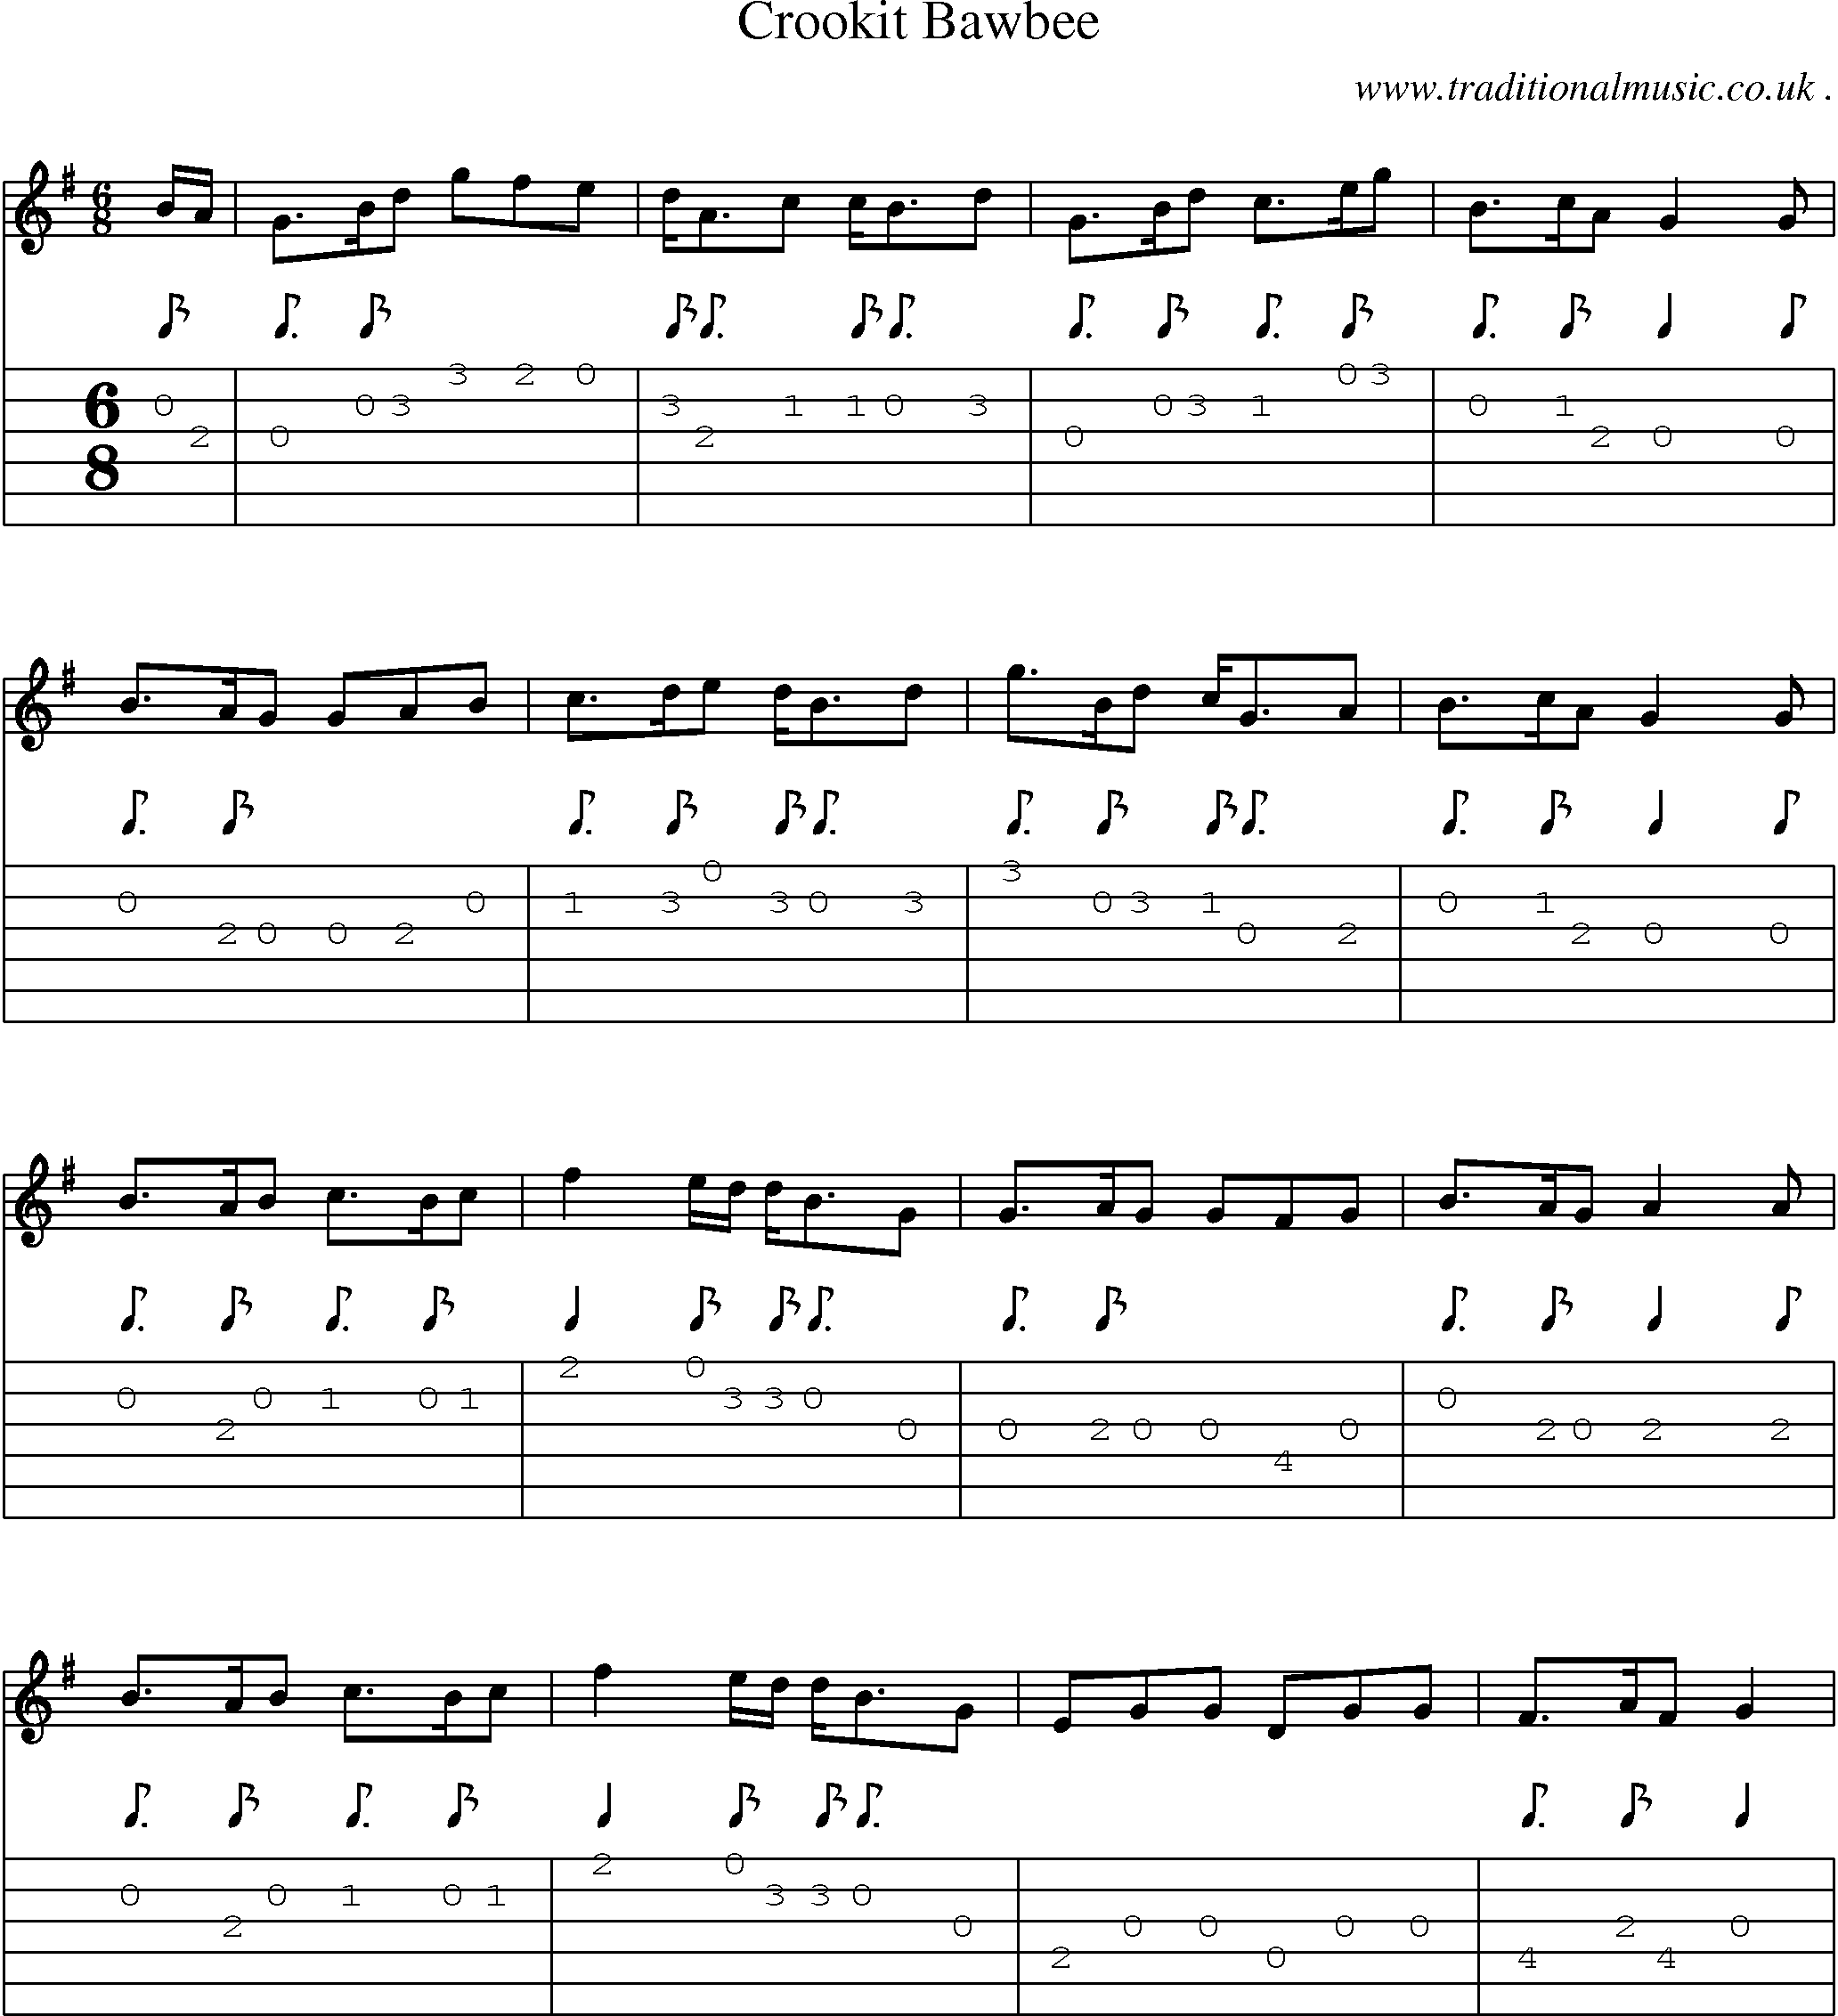 Sheet-Music and Guitar Tabs for Crookit Bawbee